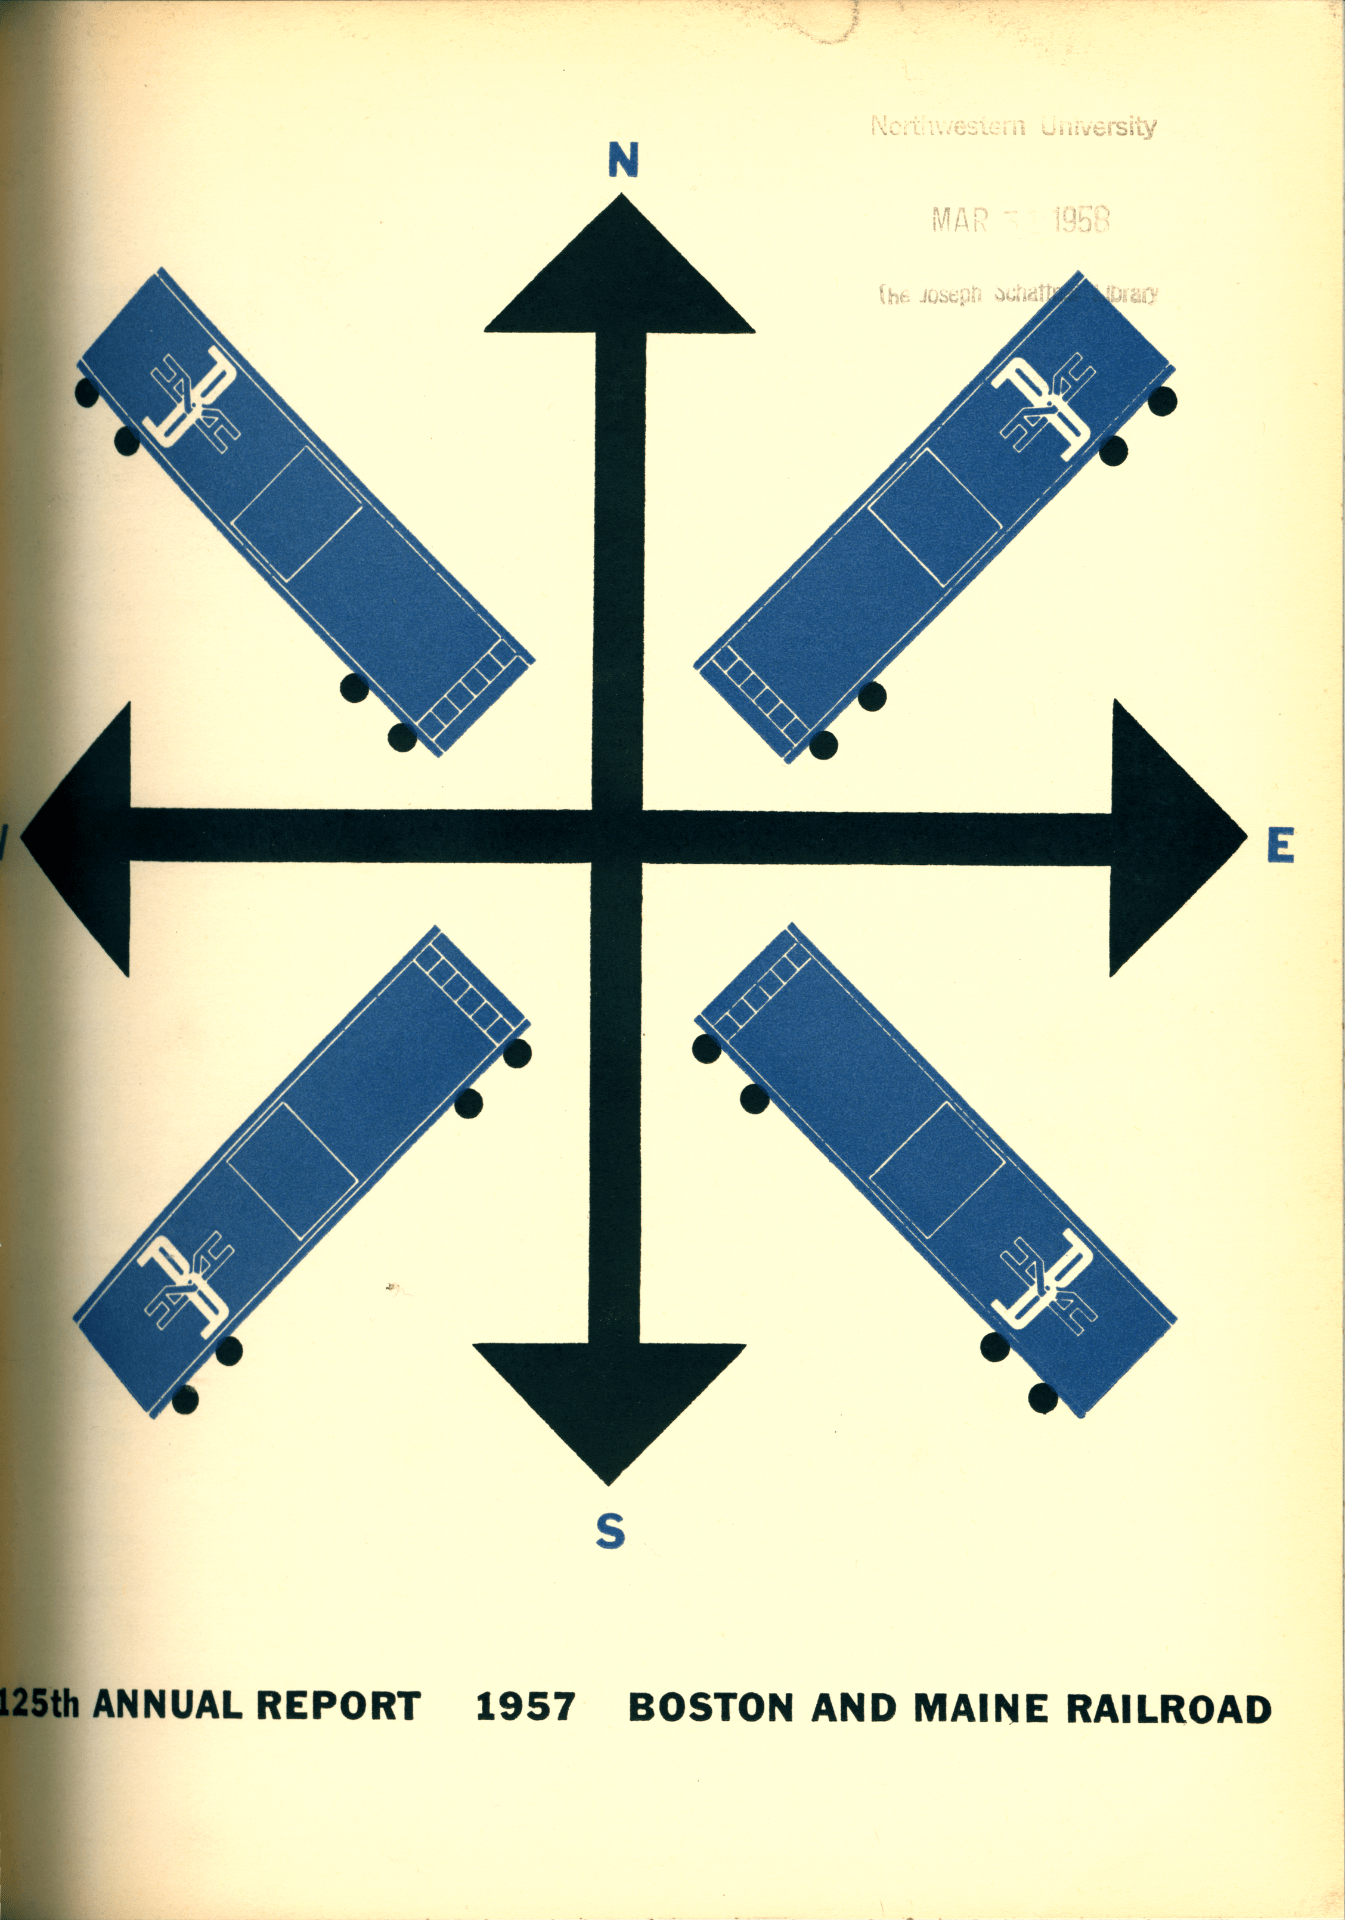 A cross made of four arrows with four train cars going out of the corners of the cross